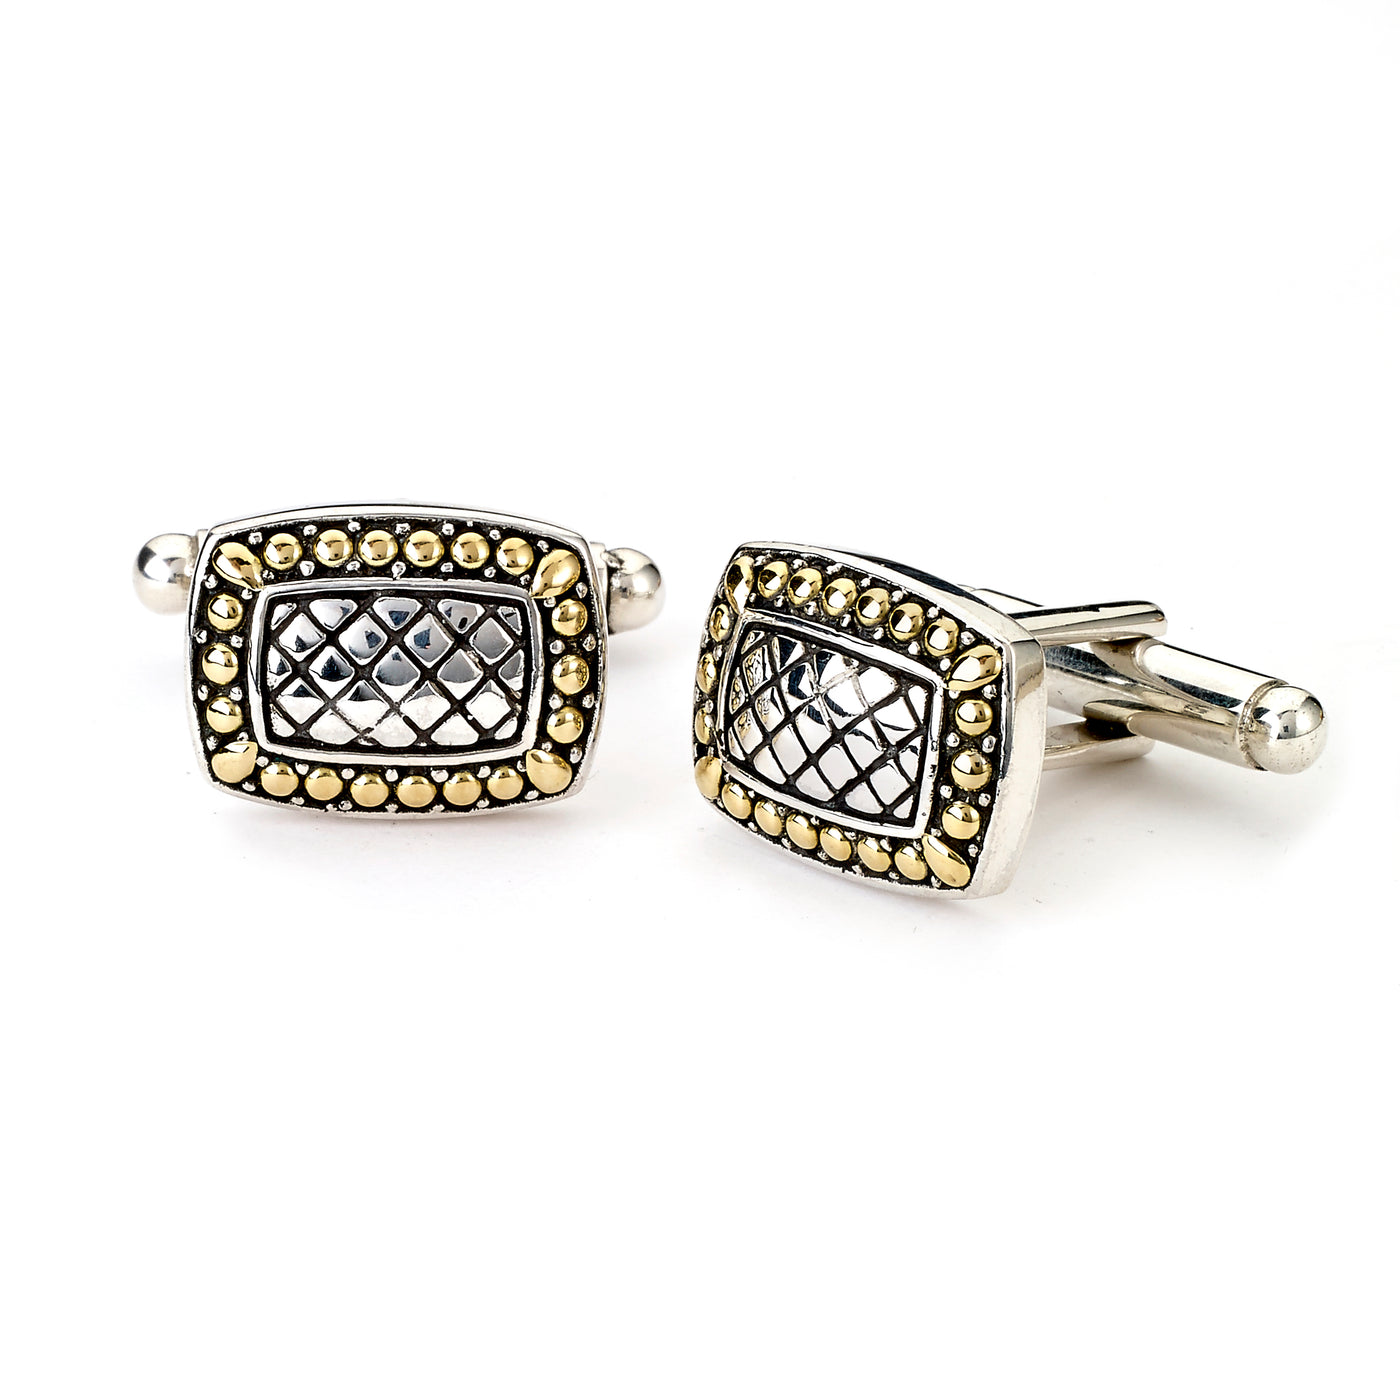 Sterling Silver and 18K Rectangle Checkerboard Cuff Links